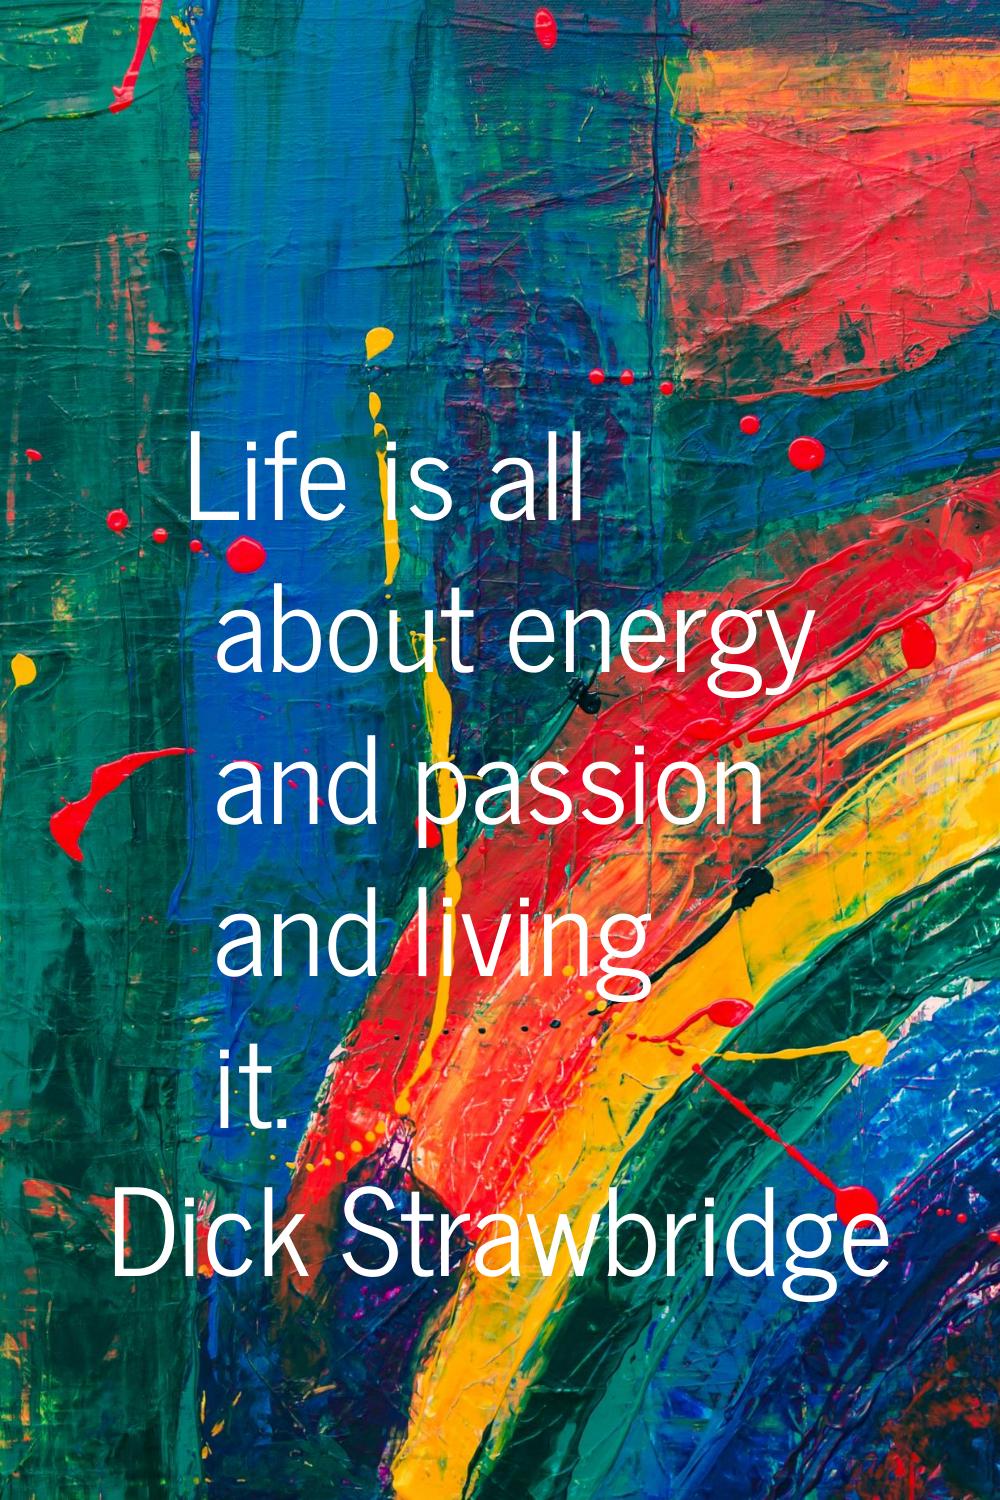 Life is all about energy and passion and living it.